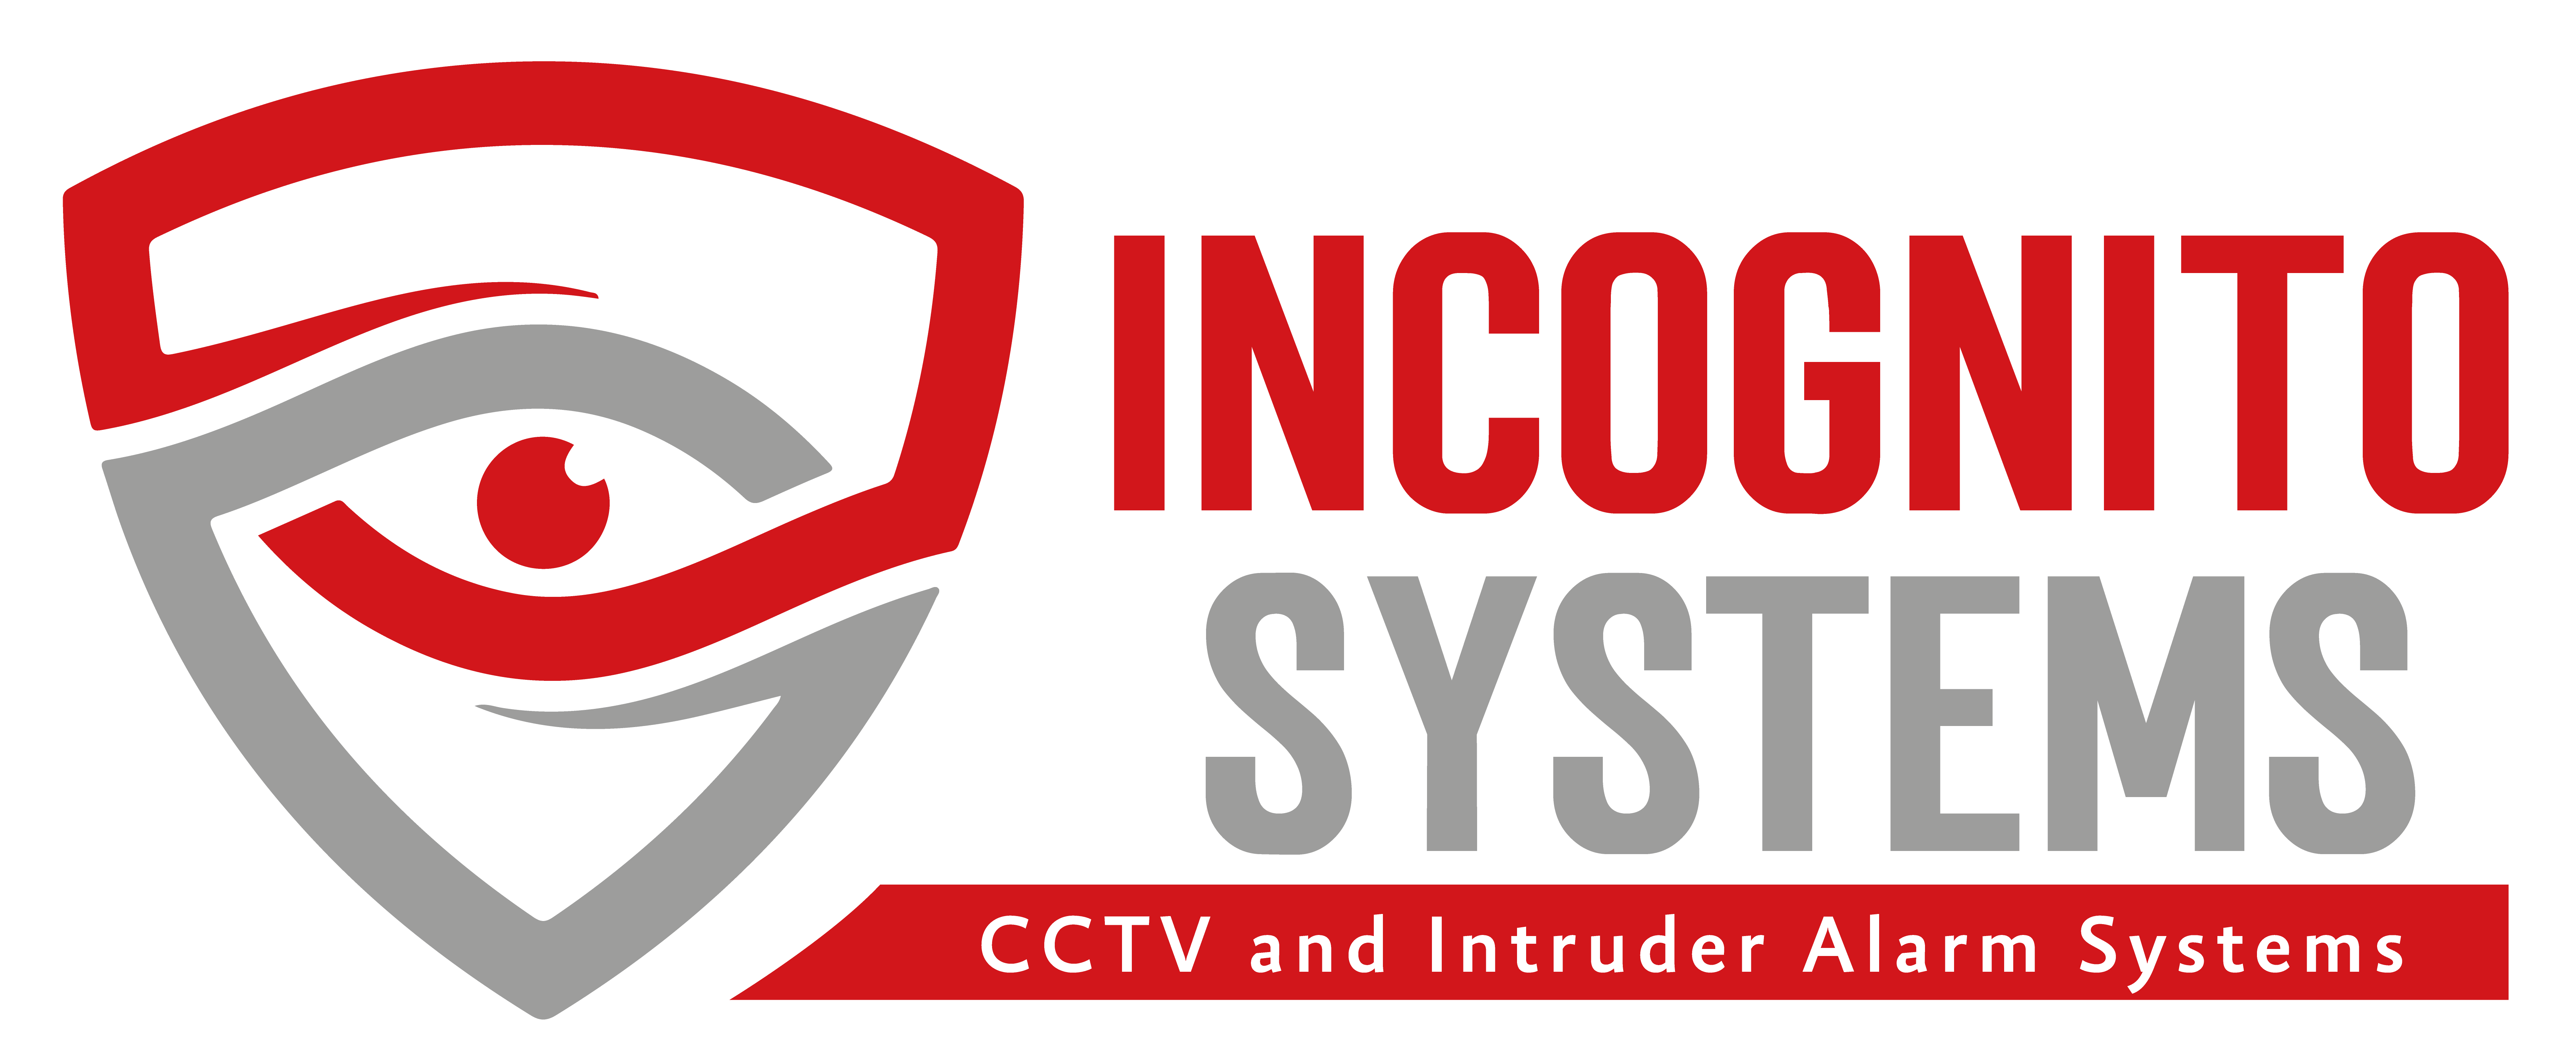 Incognito Systems Limited